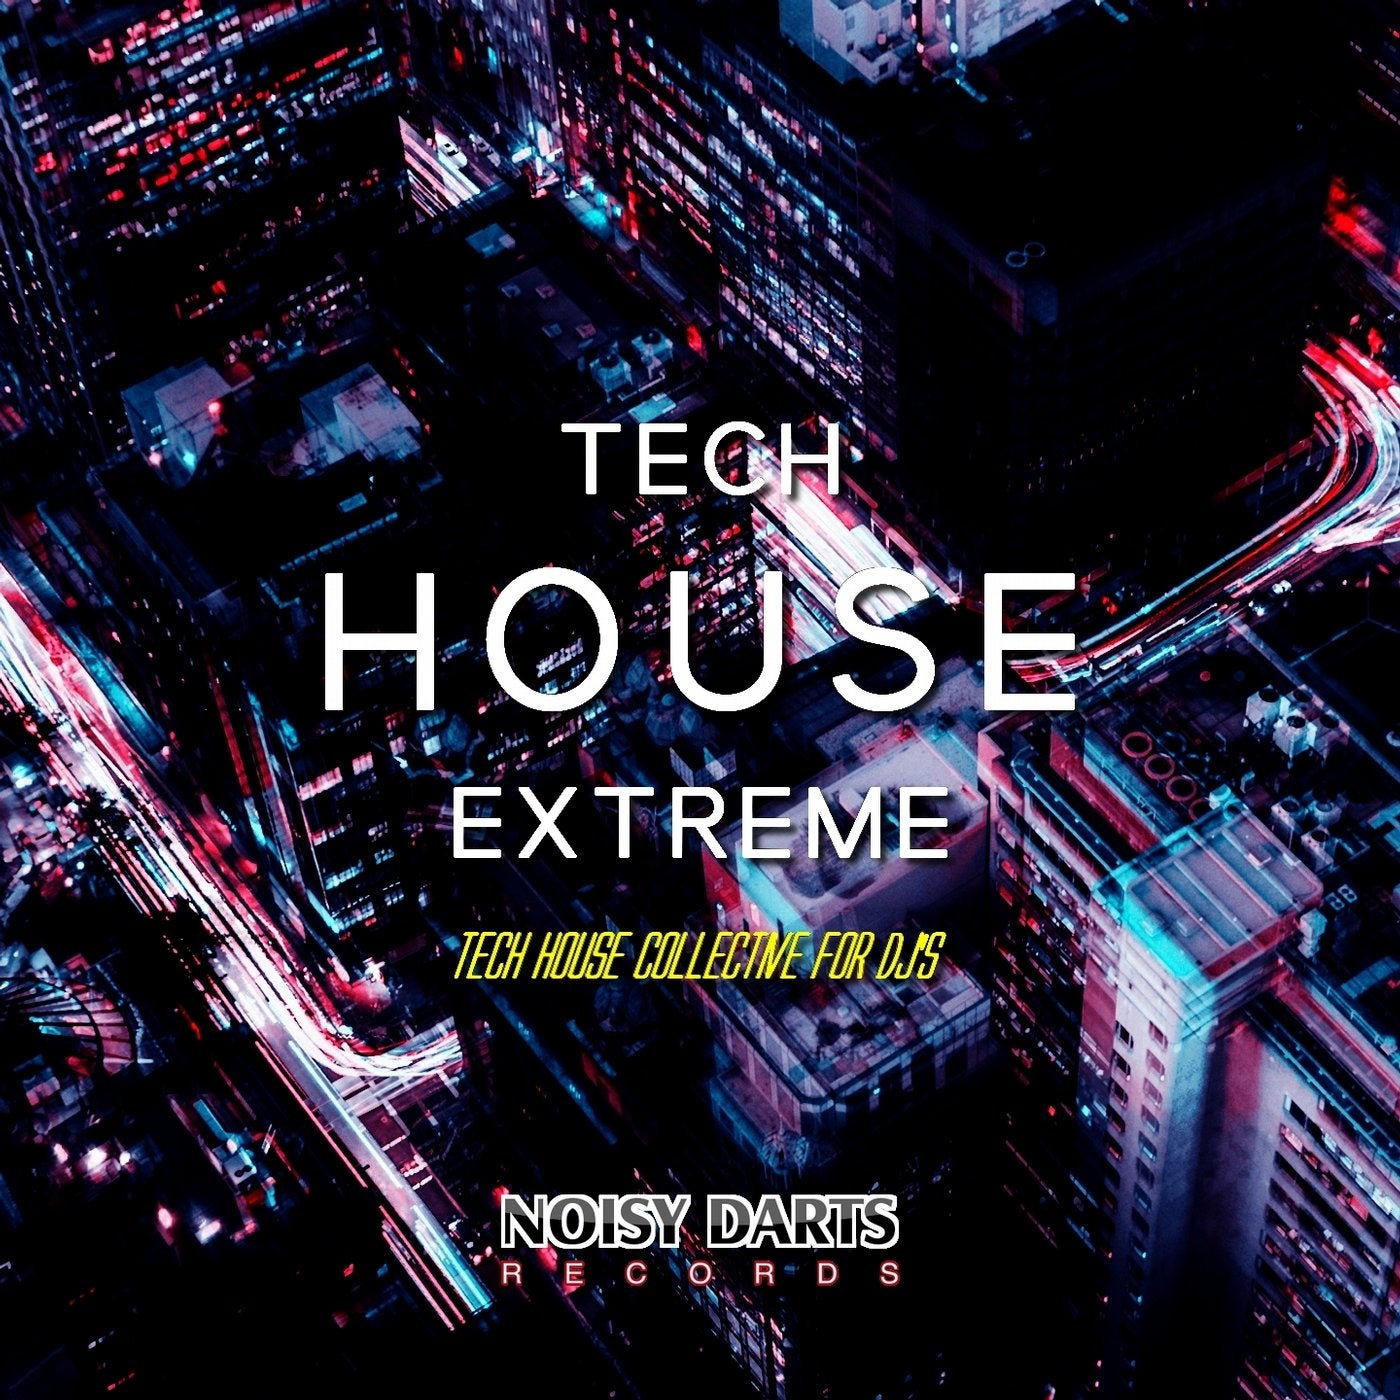 Tech House Extreme (Tech House Collective for DJ's)